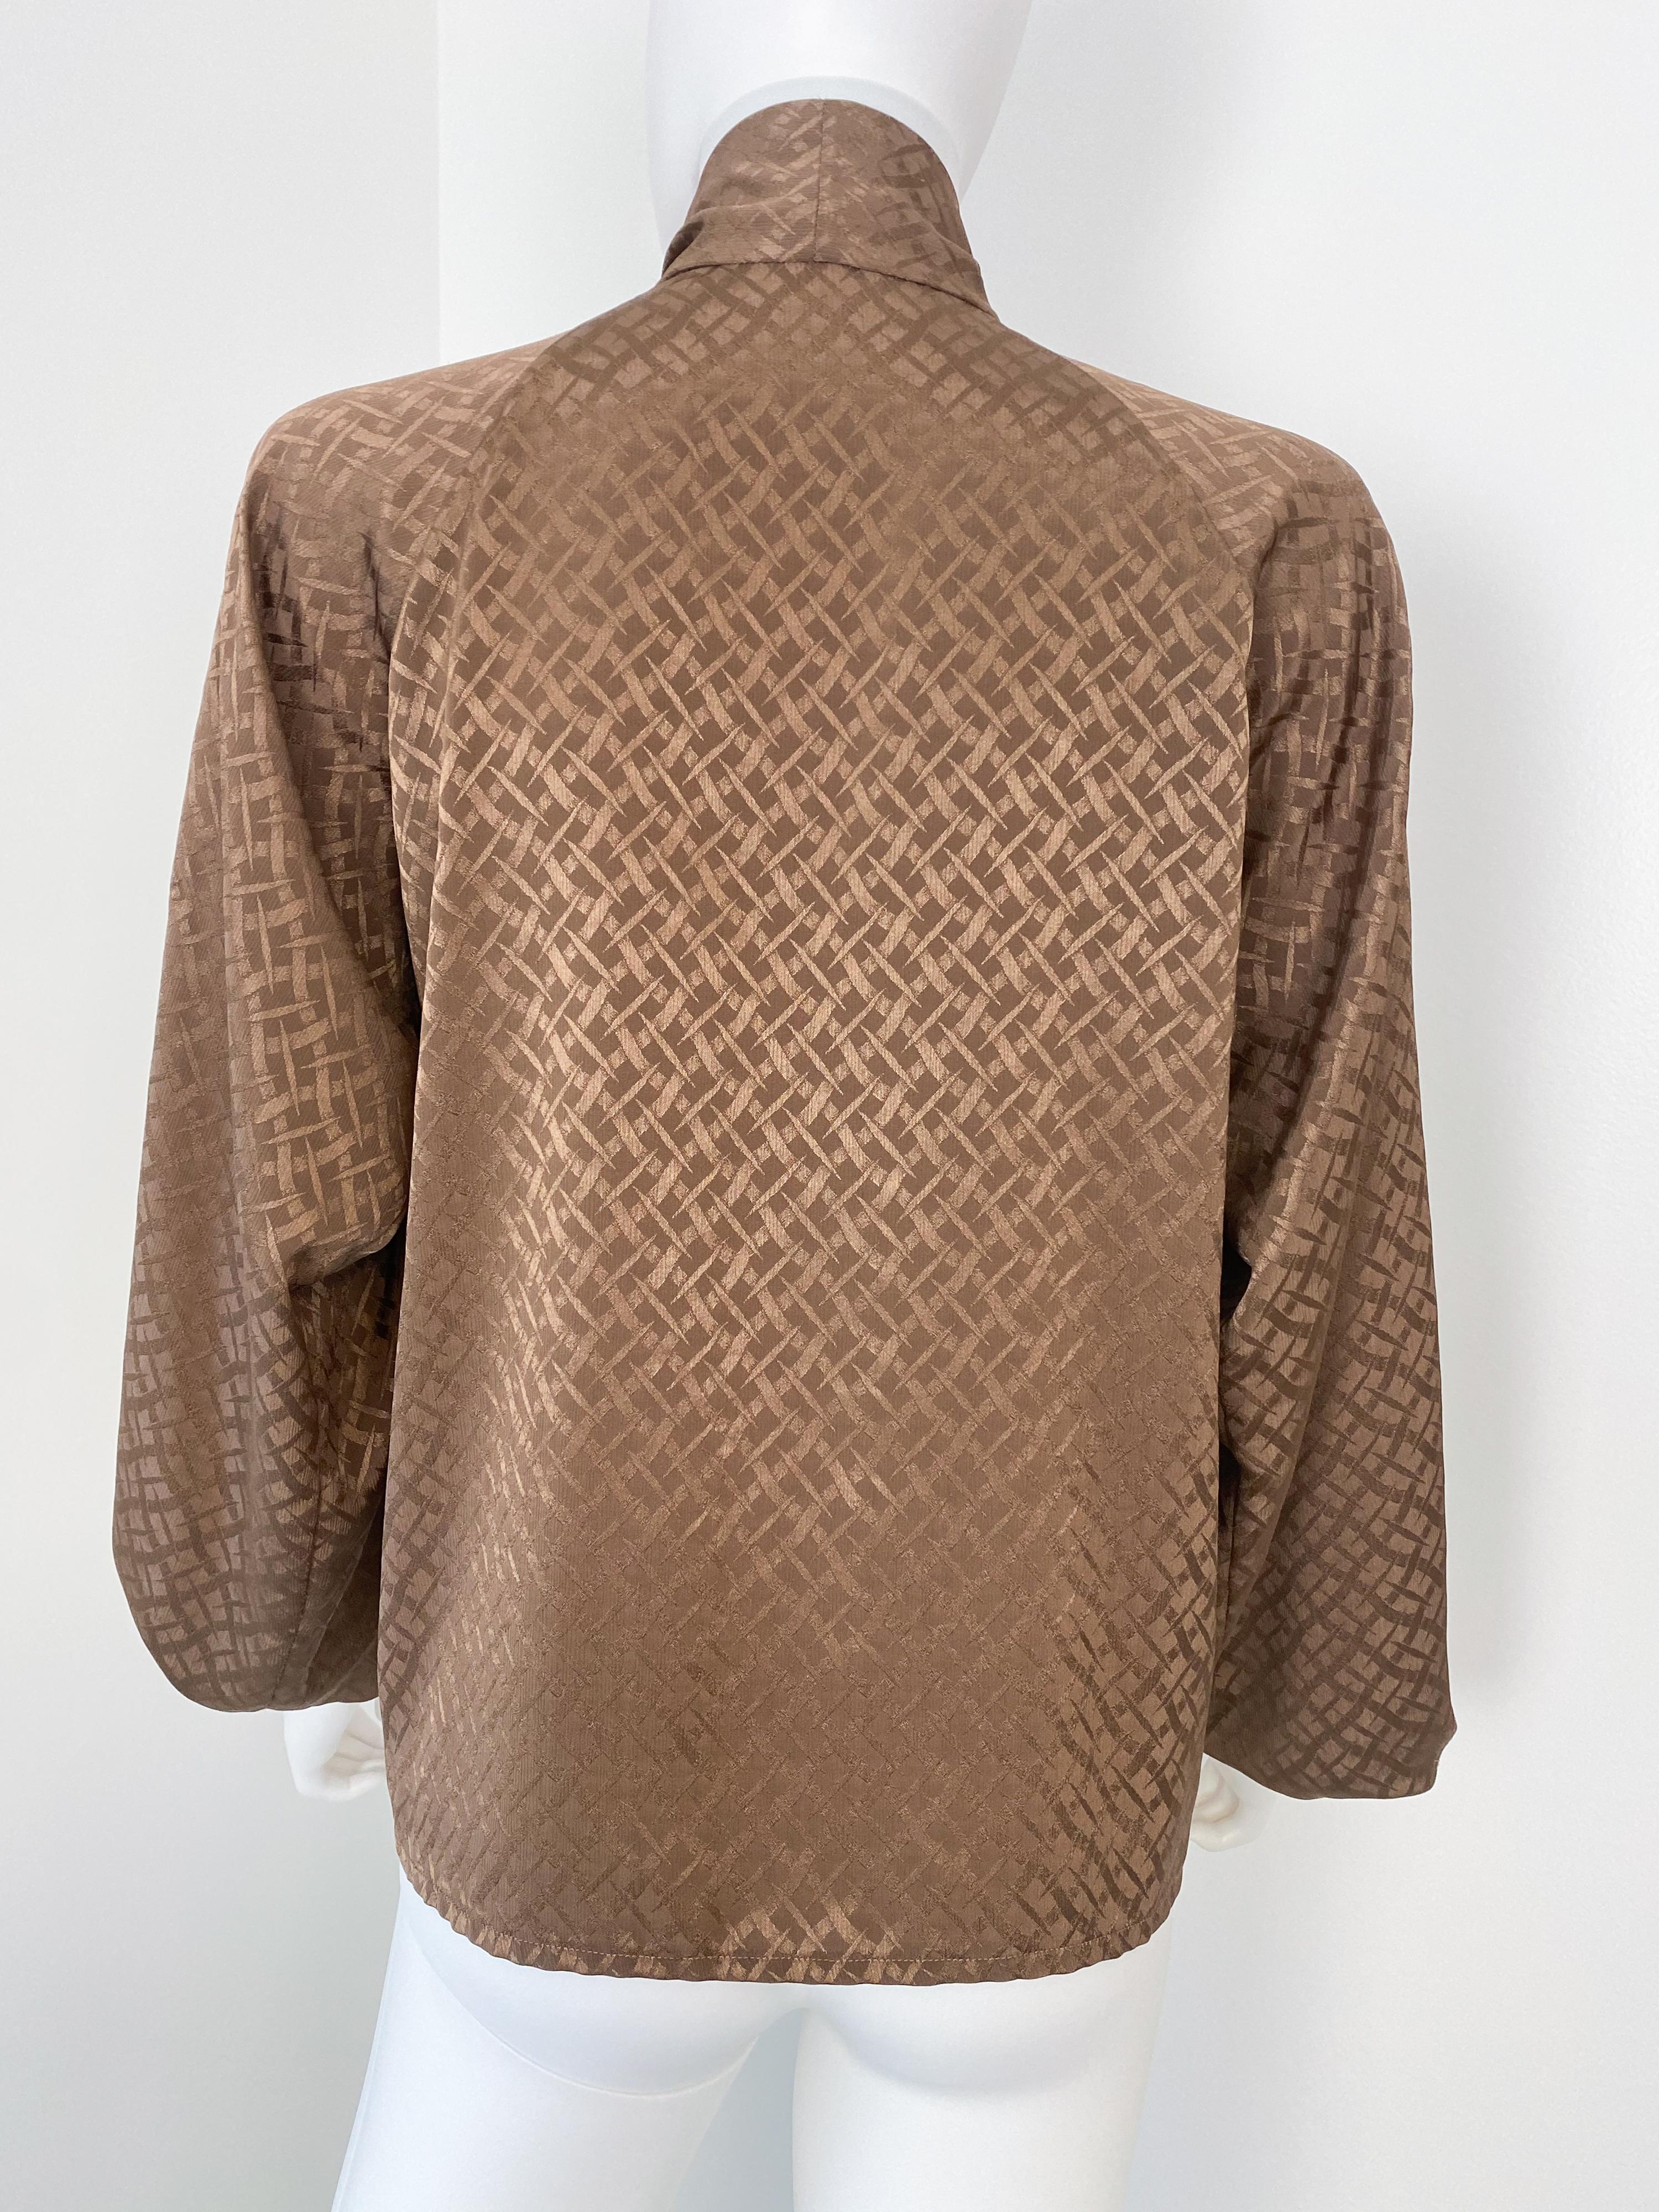 Vintage 1980s Silky Polyester Bow Blouse Top Brown Geometric Print Size 6/8 For Sale 4